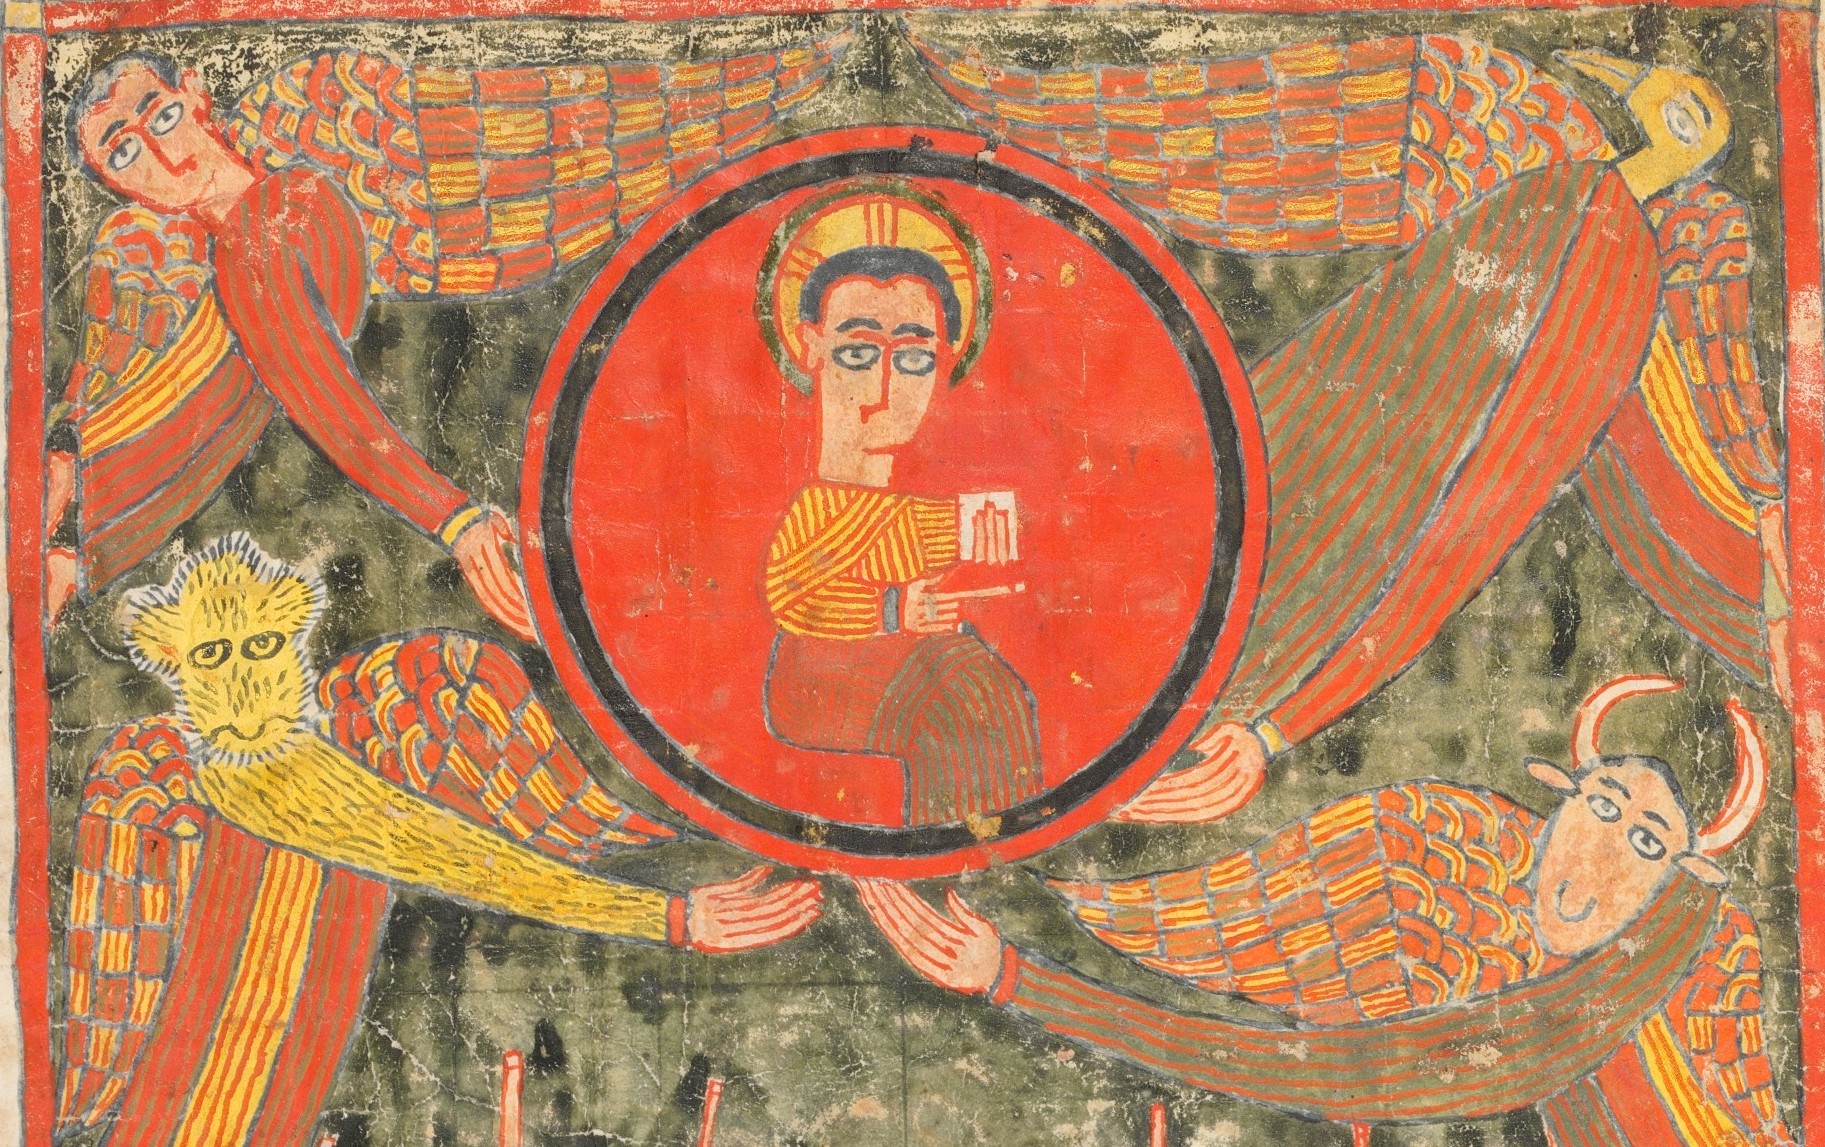 Christ (detail), Illuminated Gospel, Amhara peoples, Ethiopia, late 14th–early 15th century, parchment (vellum), wood (acacia), tempera and ink, 41.9 x 28.6 x 10.2 cm (The Metropolitan Museum of Art, New York)